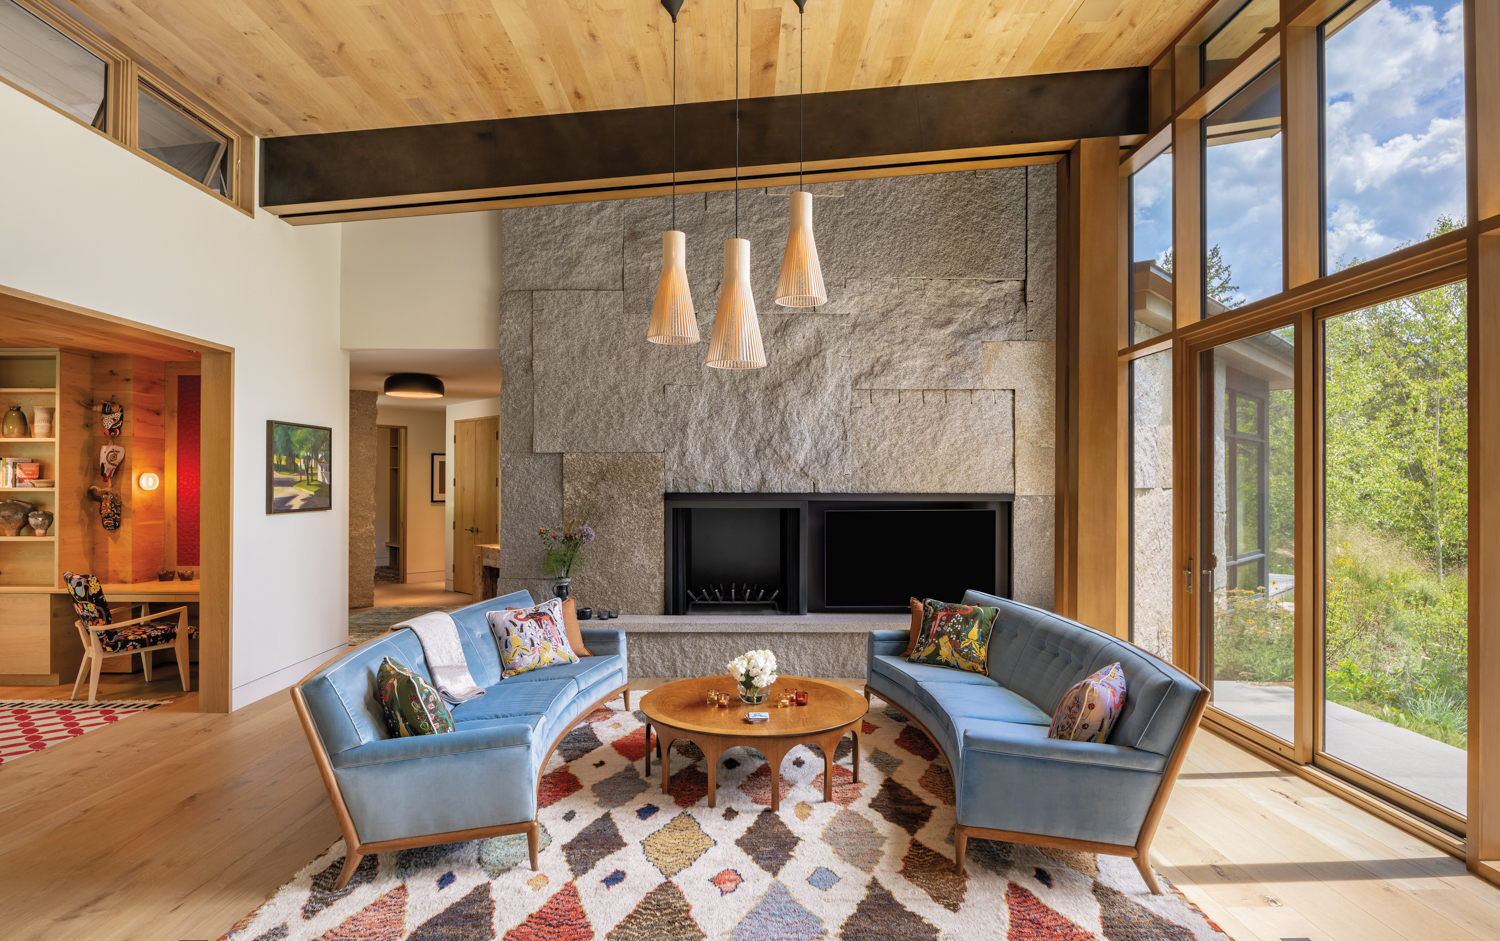 Living room with two light-blue sofas, a geometric rug in soft hues and a large granite fireplace surround